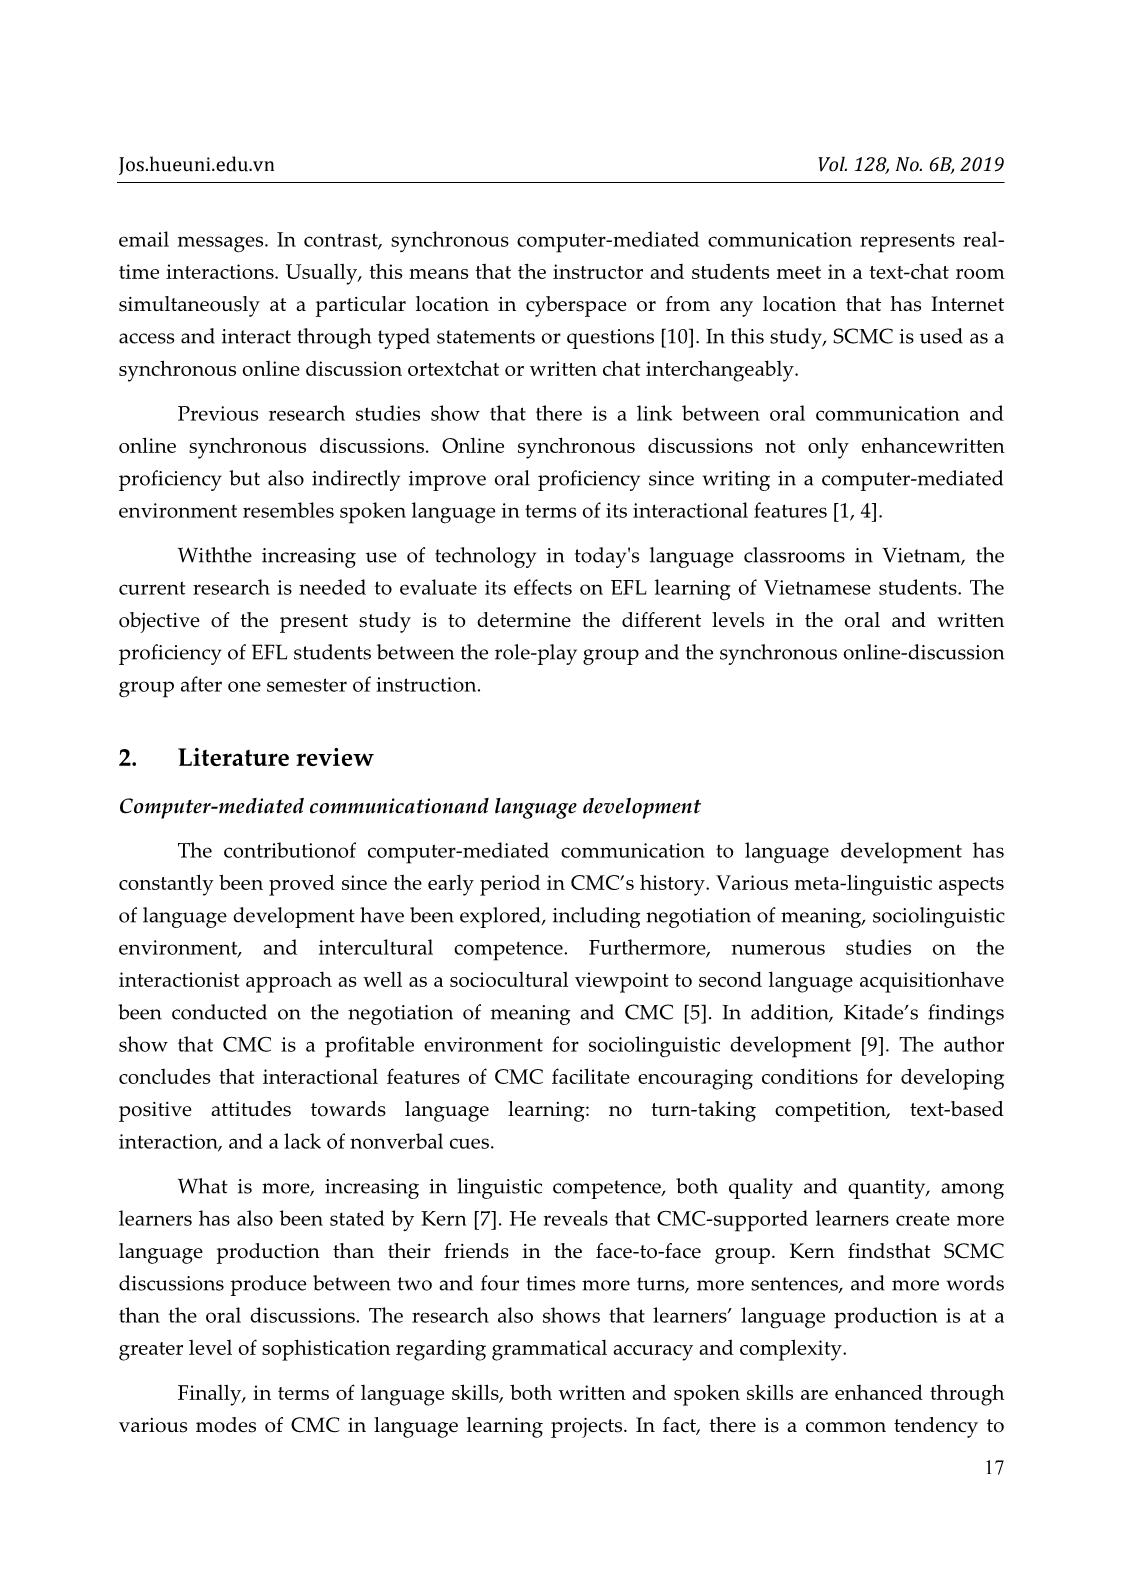 Quantitative analysis of the effect of synchronous online discussions on oral and written language development for efl university students in Vietnam trang 2